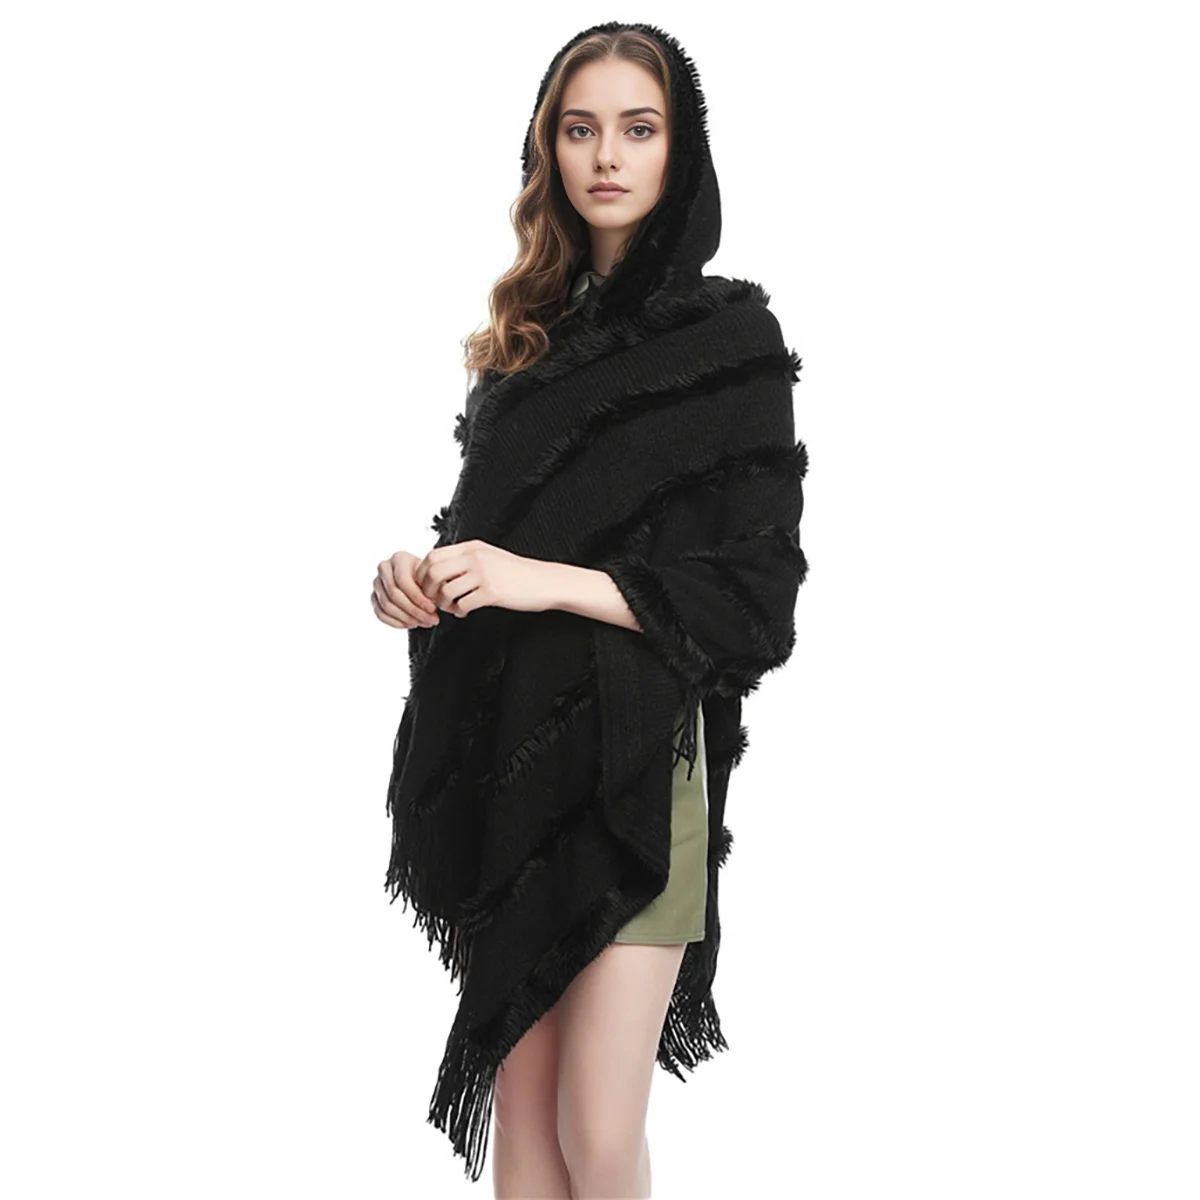 

Fashion Mongolian Poncho with Hat Women's Ethnic Style Knitted Cape Pullover Tassel Shawl Coat Overlays Solid Knitting Wraps